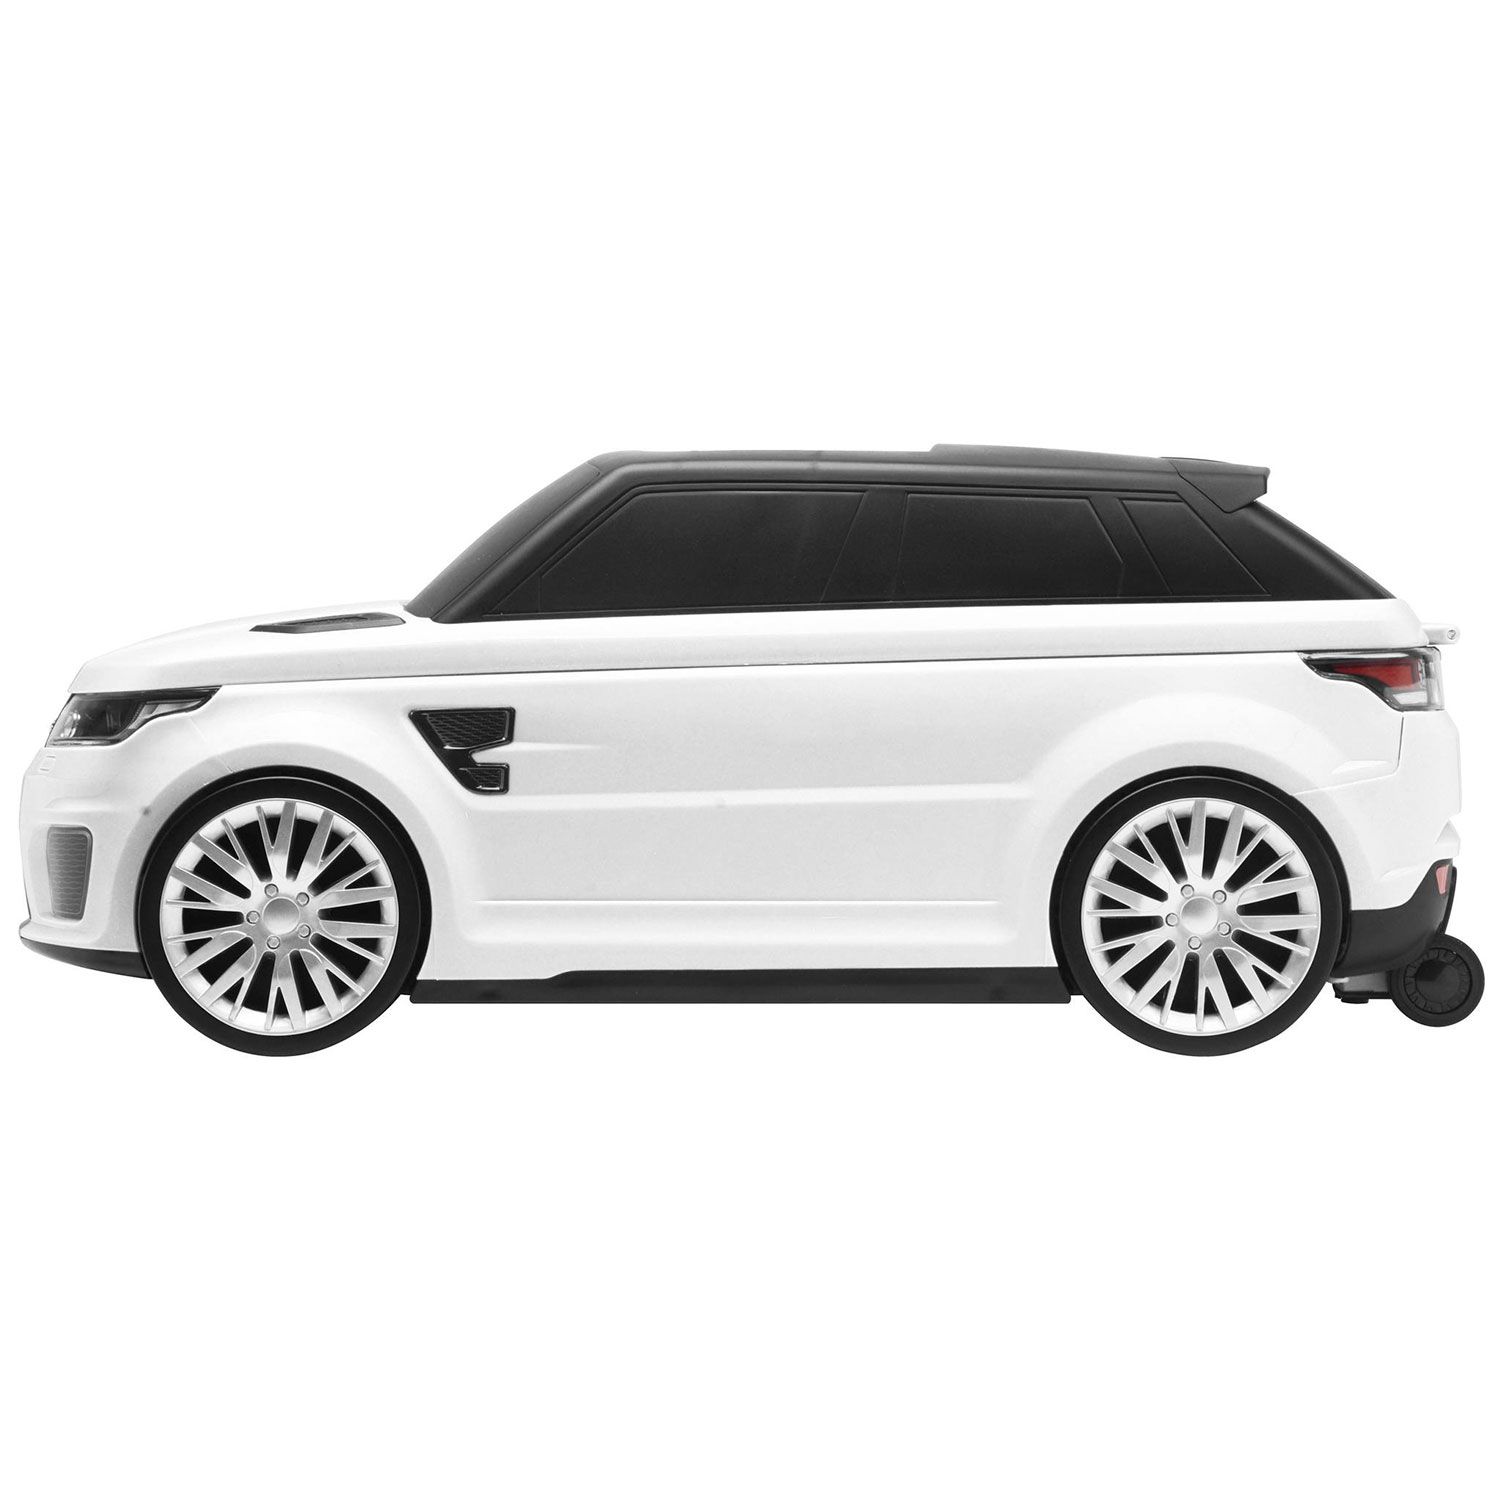 Feber Range Rover 2 In 1 Foot To Floor And Suitcase White